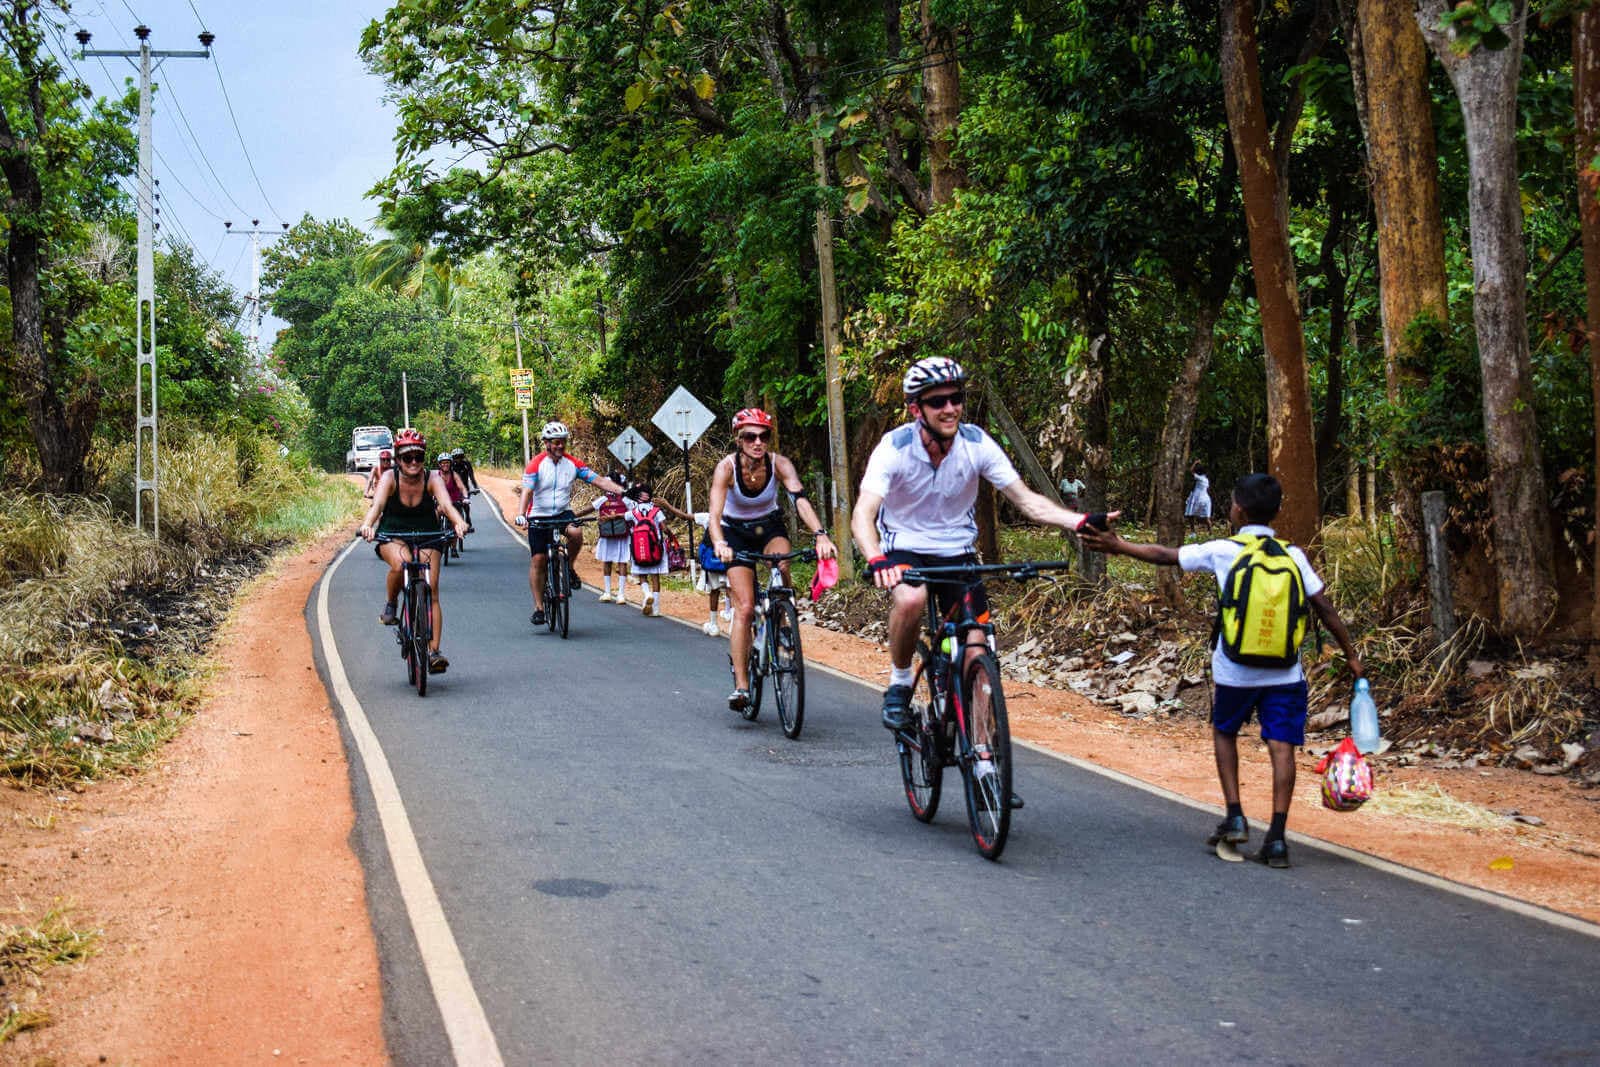 The tourists meet a school child in the Mirissa countryside cycle tour in Sri Lanka